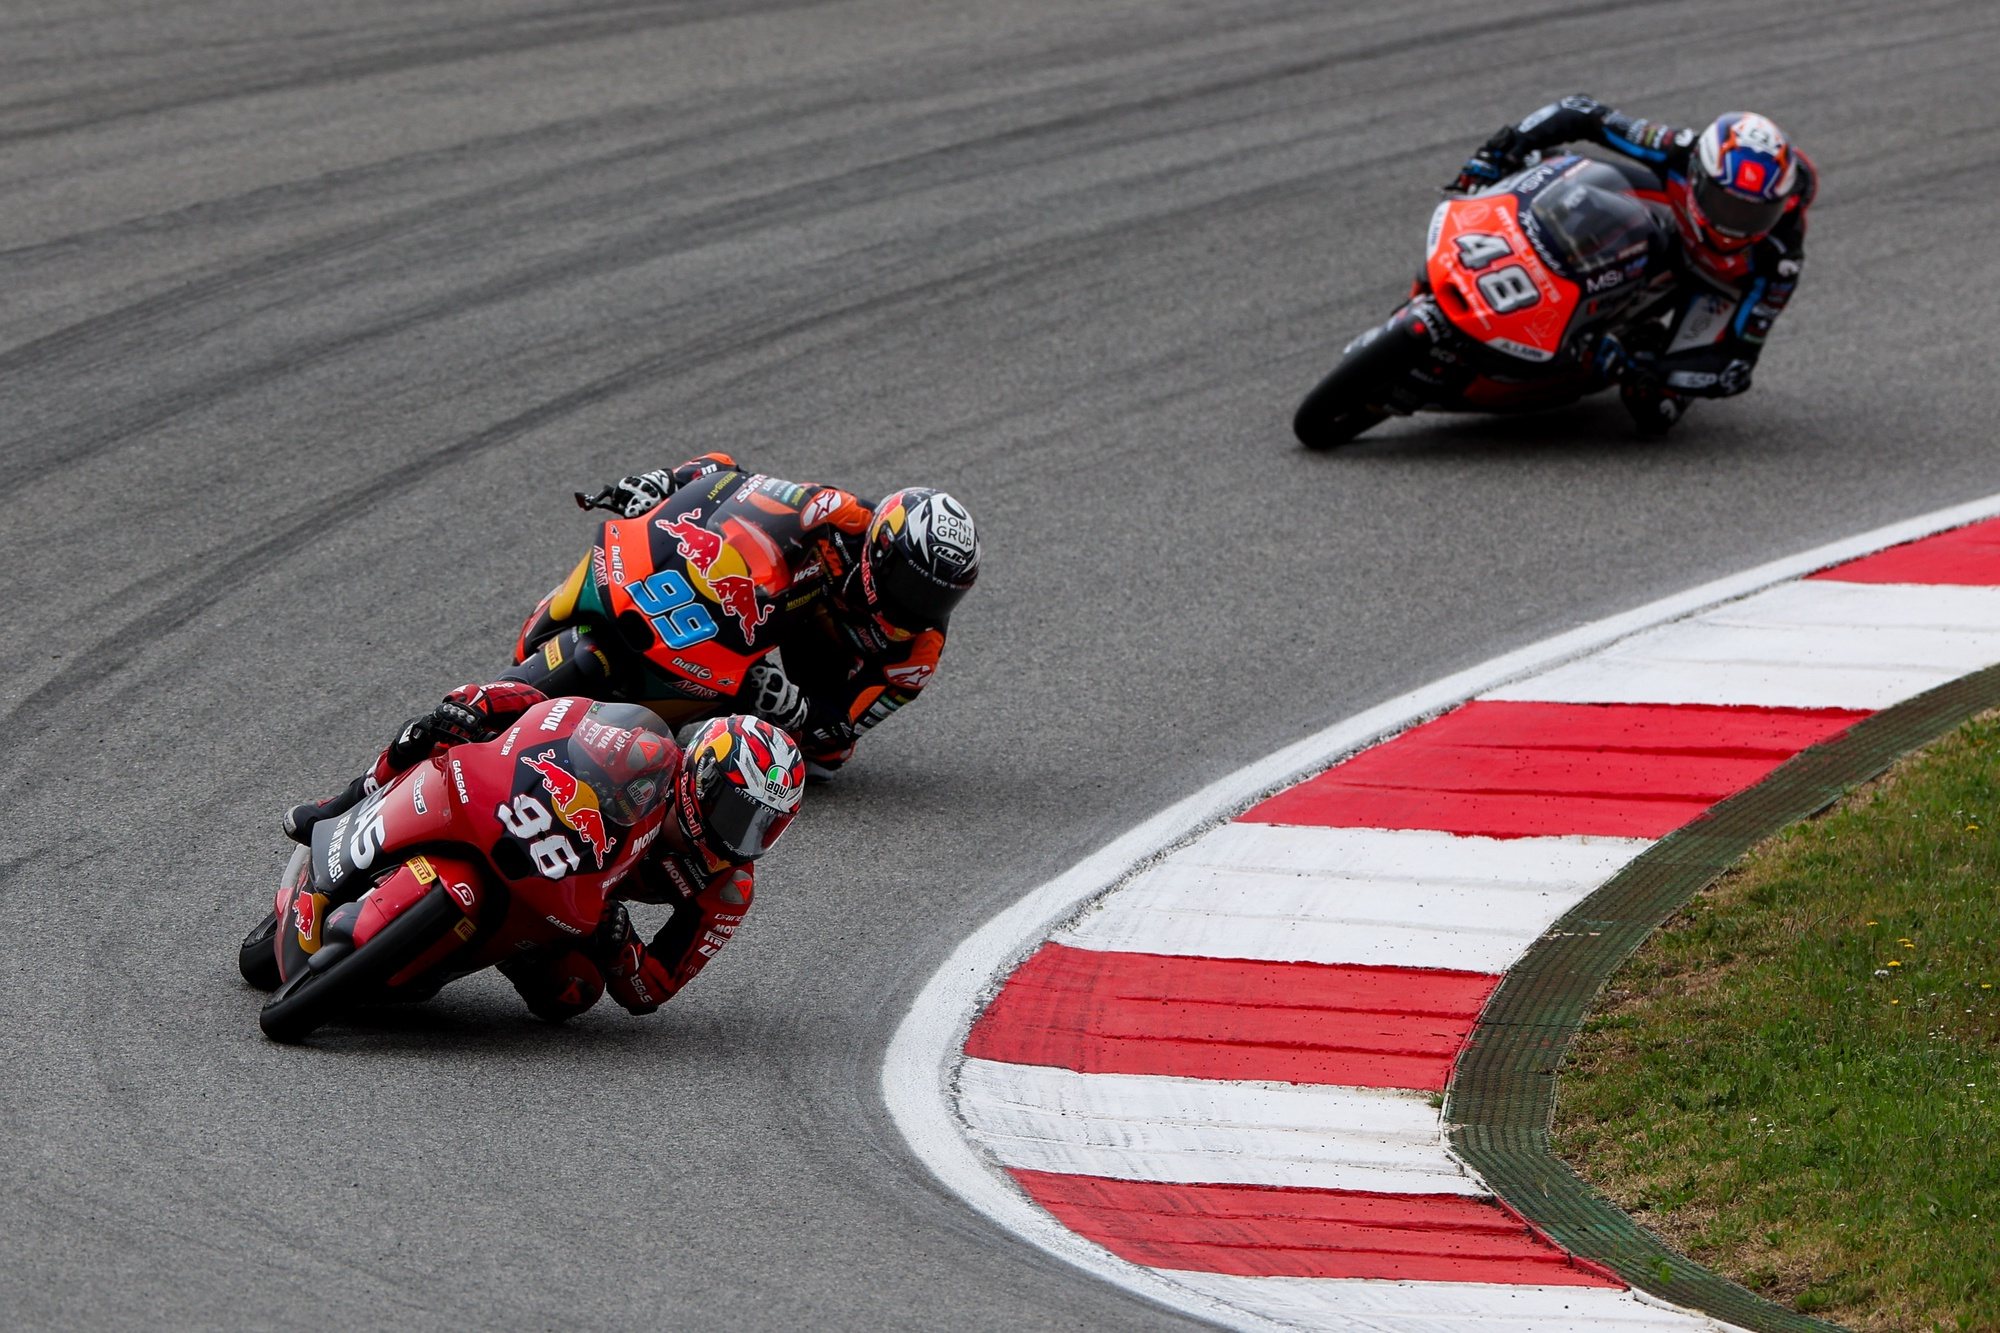 (L-R) Daniel Holgado of Spain and Red Bull GASGAS Tech3, Jose Antonio Rueda of Spain and Red Bull KTM Ajo and Ivan Ortola of Spain and MT Helmets MSI in action during the Moto3 Motorcycling Grand Prix of Portugal, in Portimao, Portugal, 24 March 2024. JOSE SENA GOULAO/LUSA